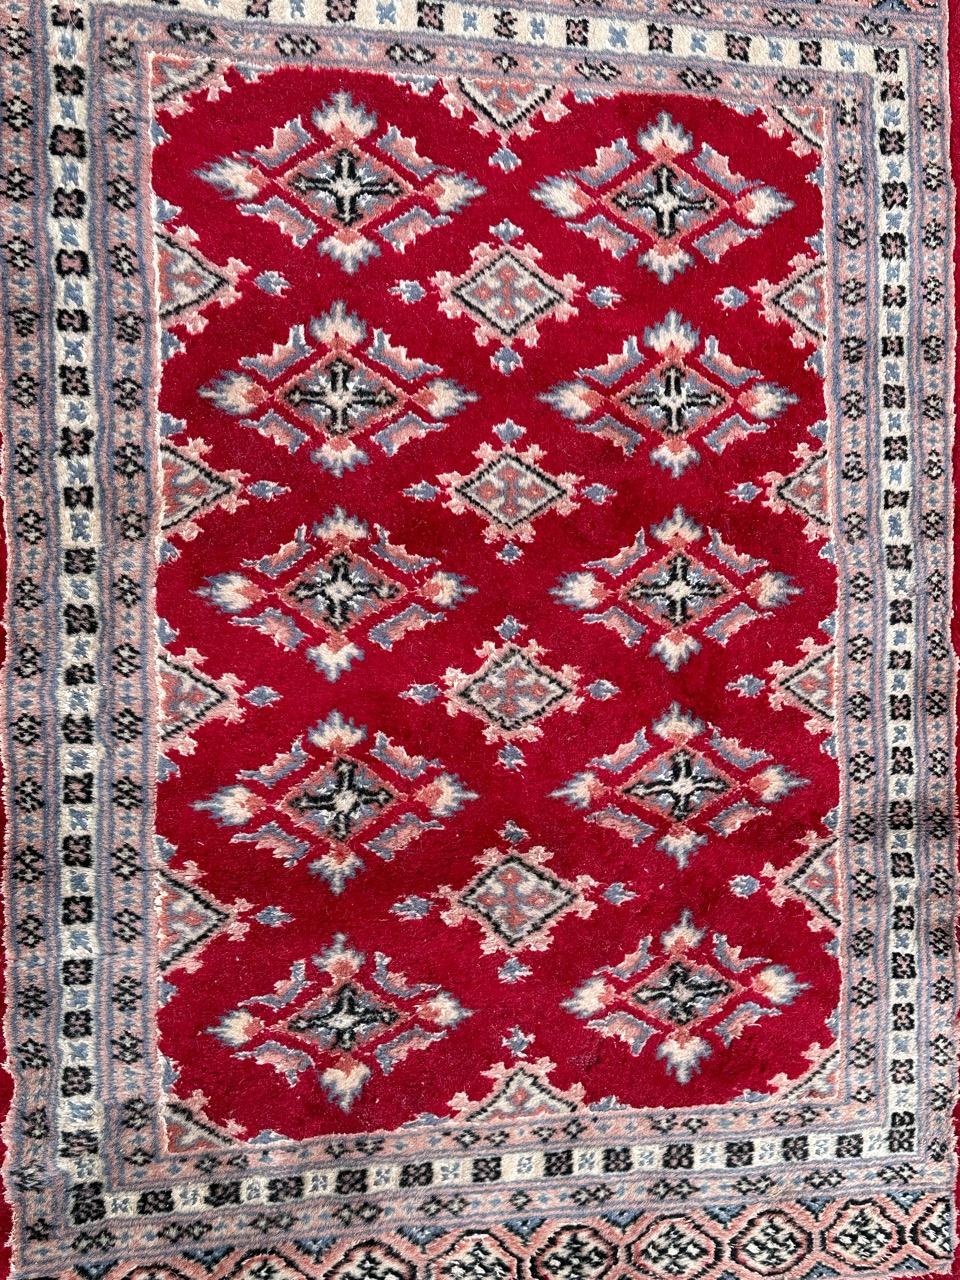 Pretty small vintage Pakistani rug with nice geometrical design in style of Turkmen rugs, and beautiful colours with red field, pink, sky blue, white and black, entirely and finely hand knotted with wool on cotton foundation.

✨✨✨
